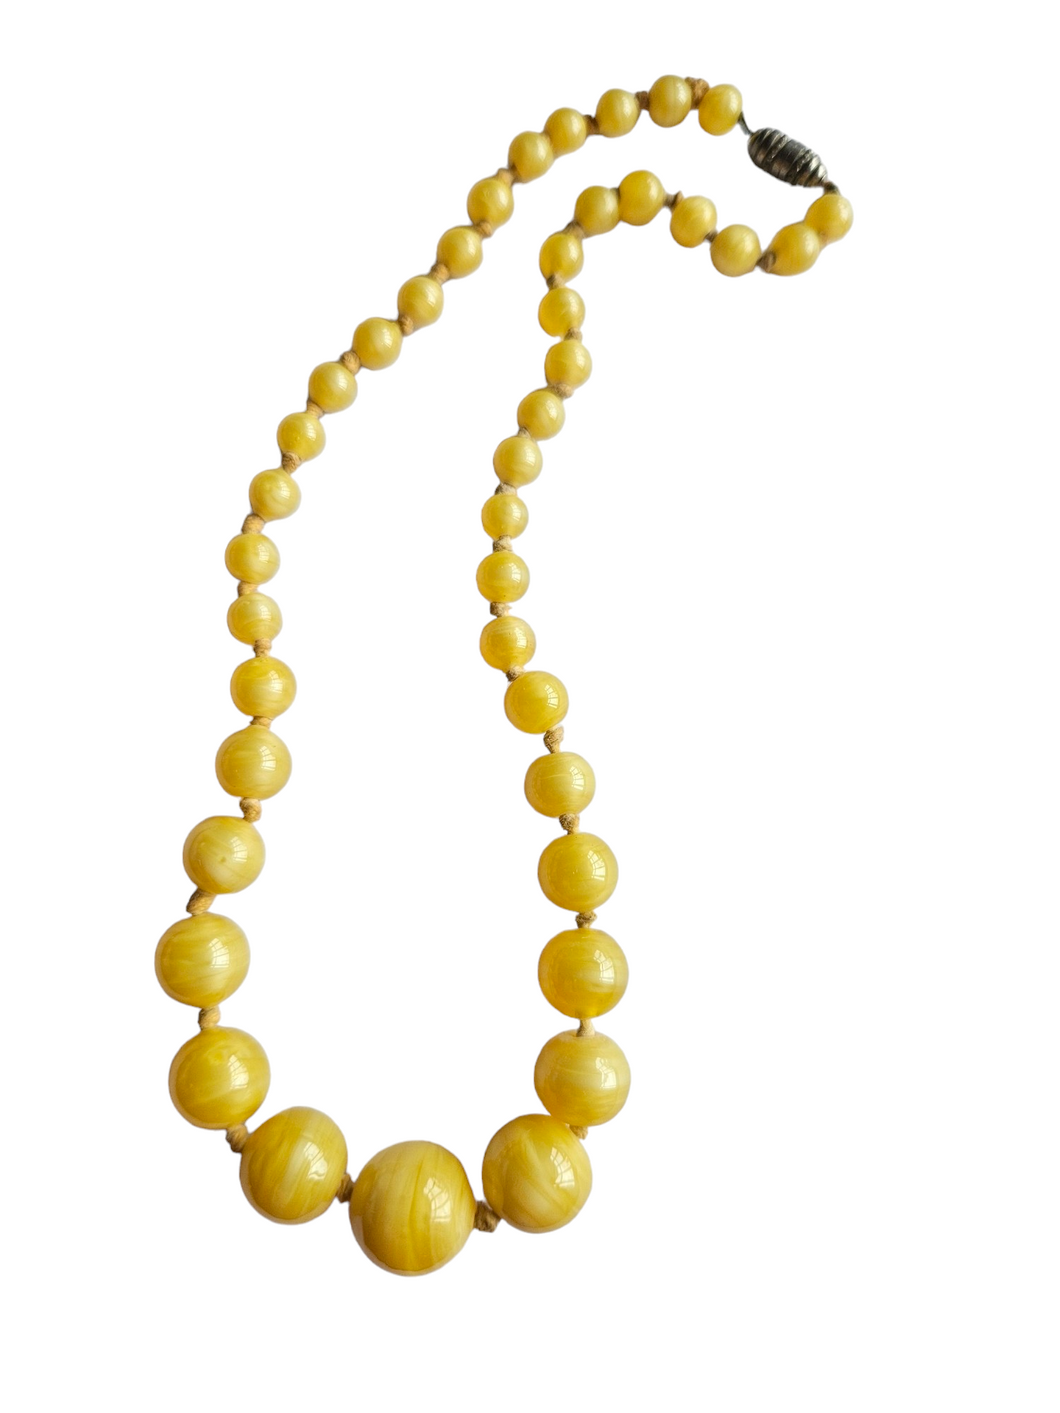 1940s Bright Yellow Satin Glass Knotted Necklace